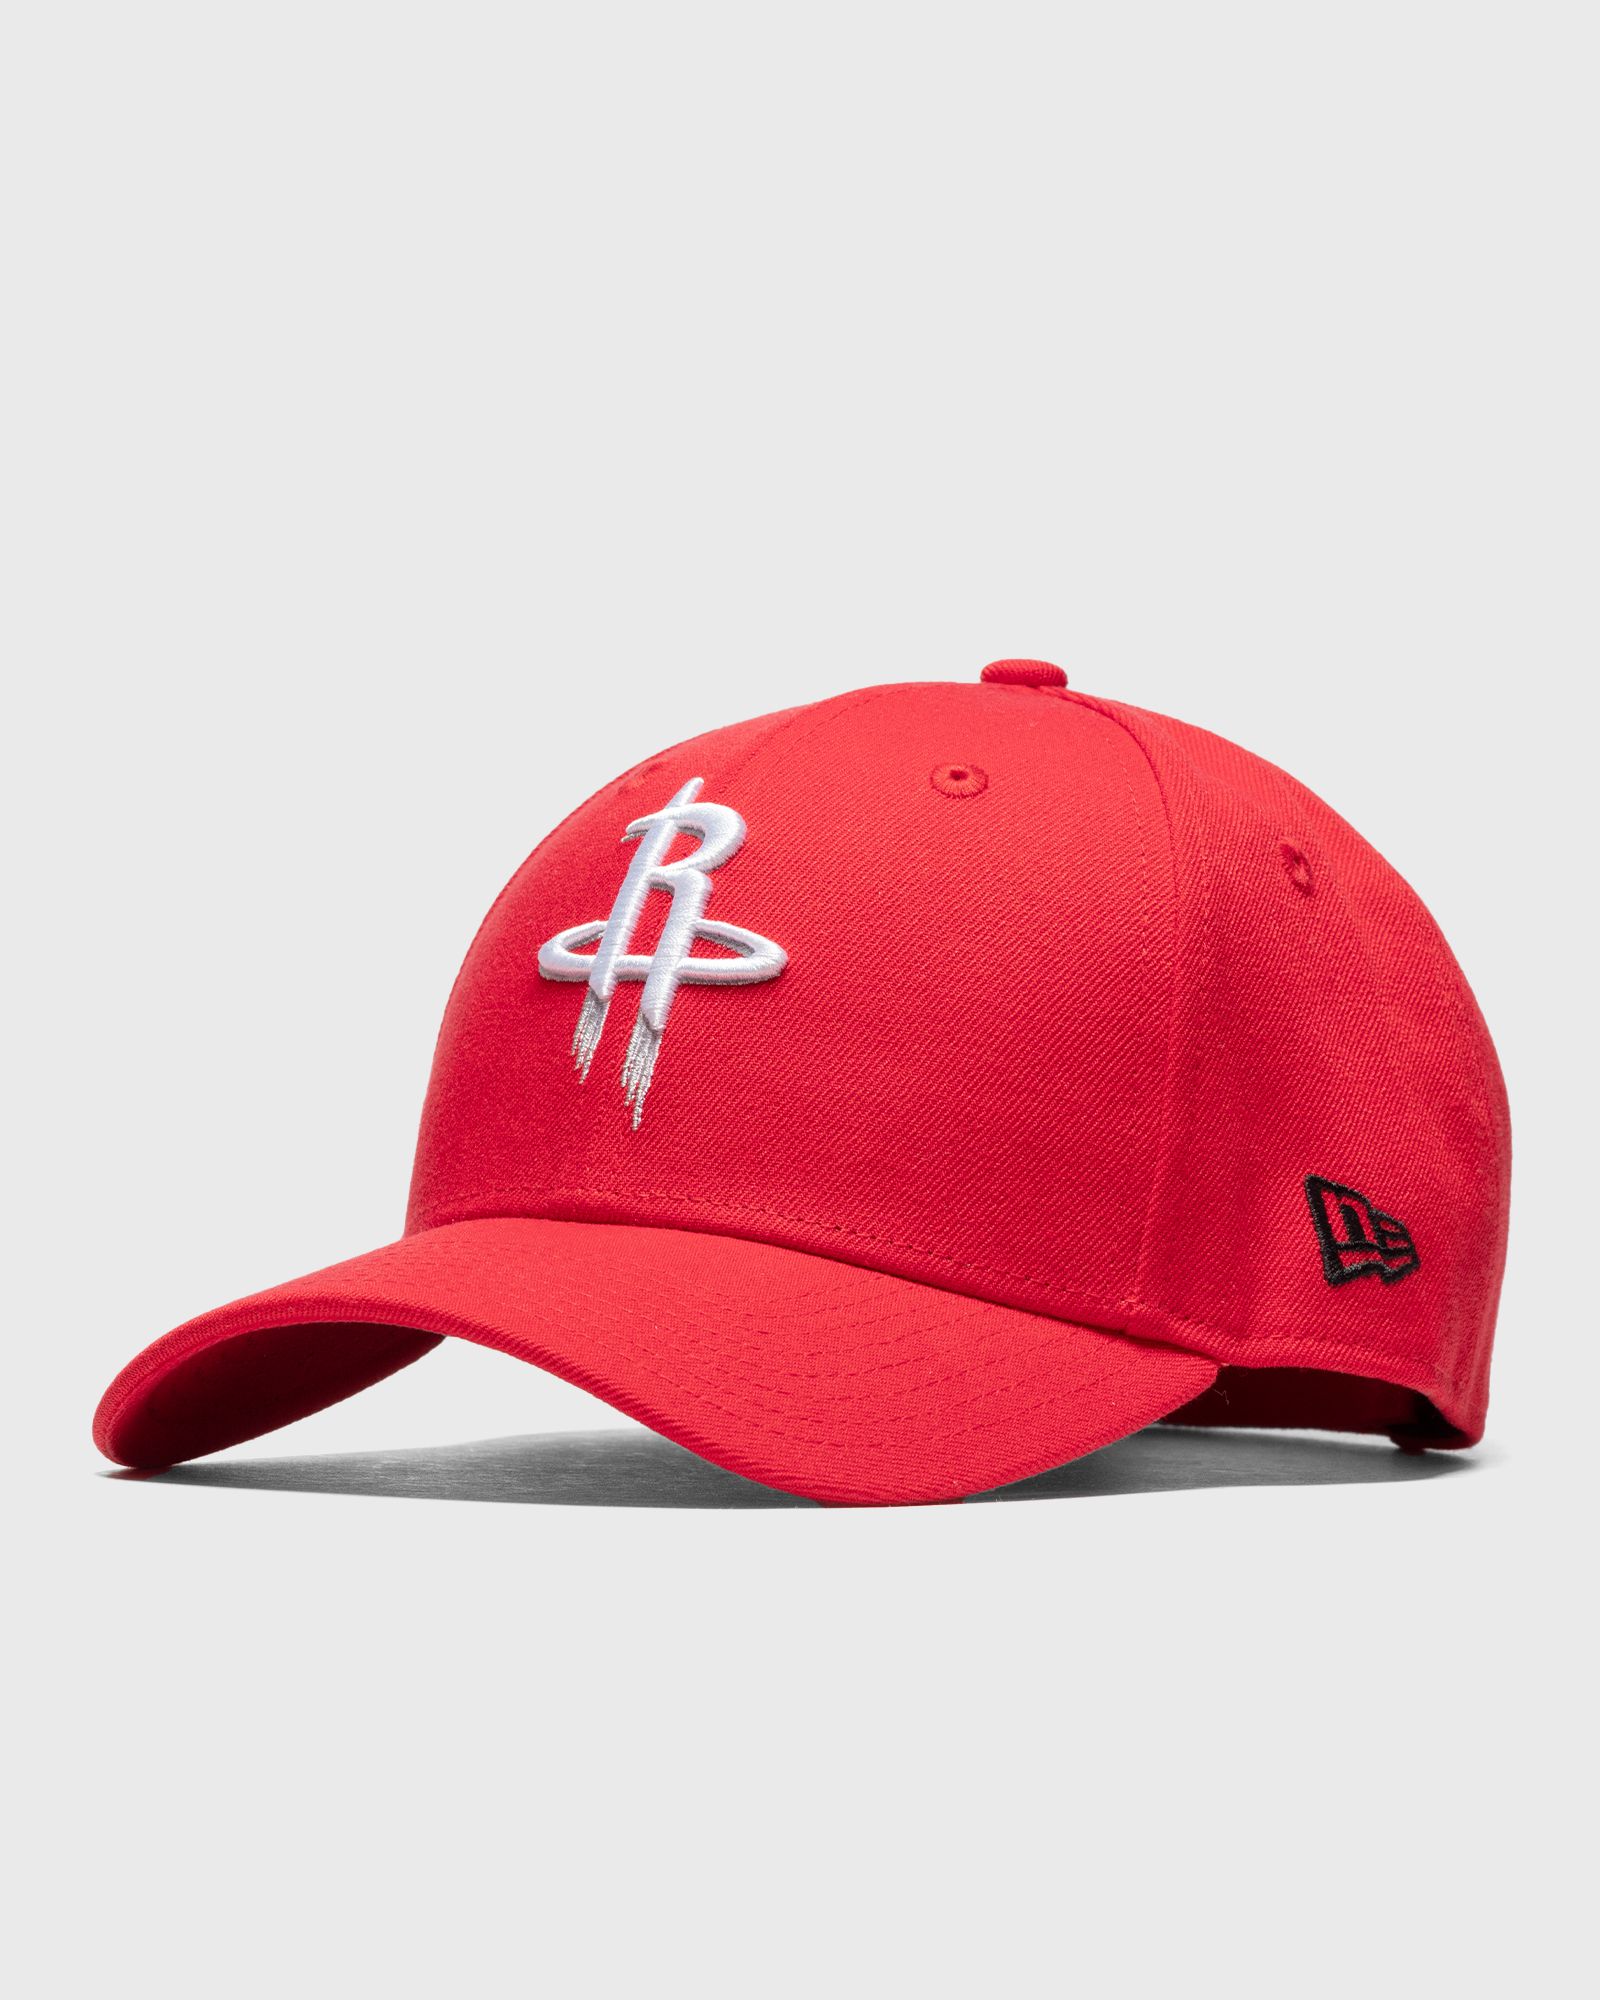 New Era - 9forty the league houston rocket cap men caps red in größe:one size